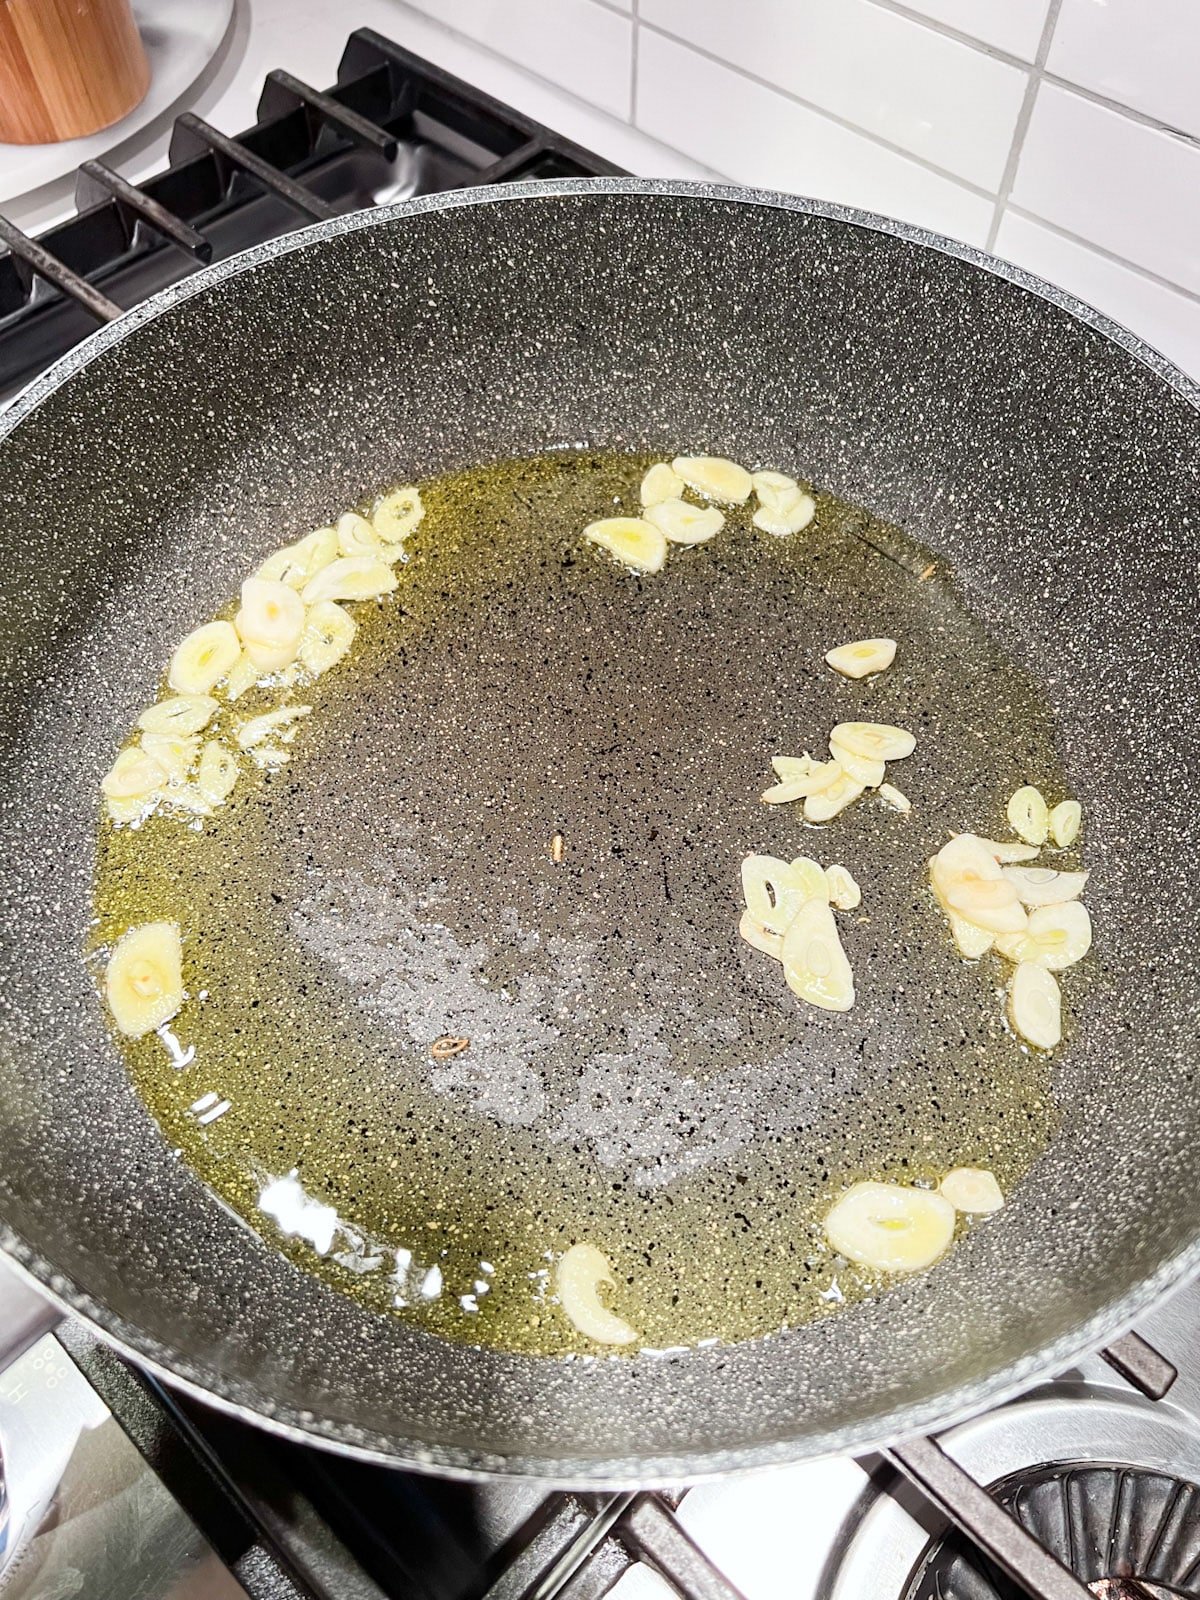 A sauté pan with hot oil and sliced garlic in it.